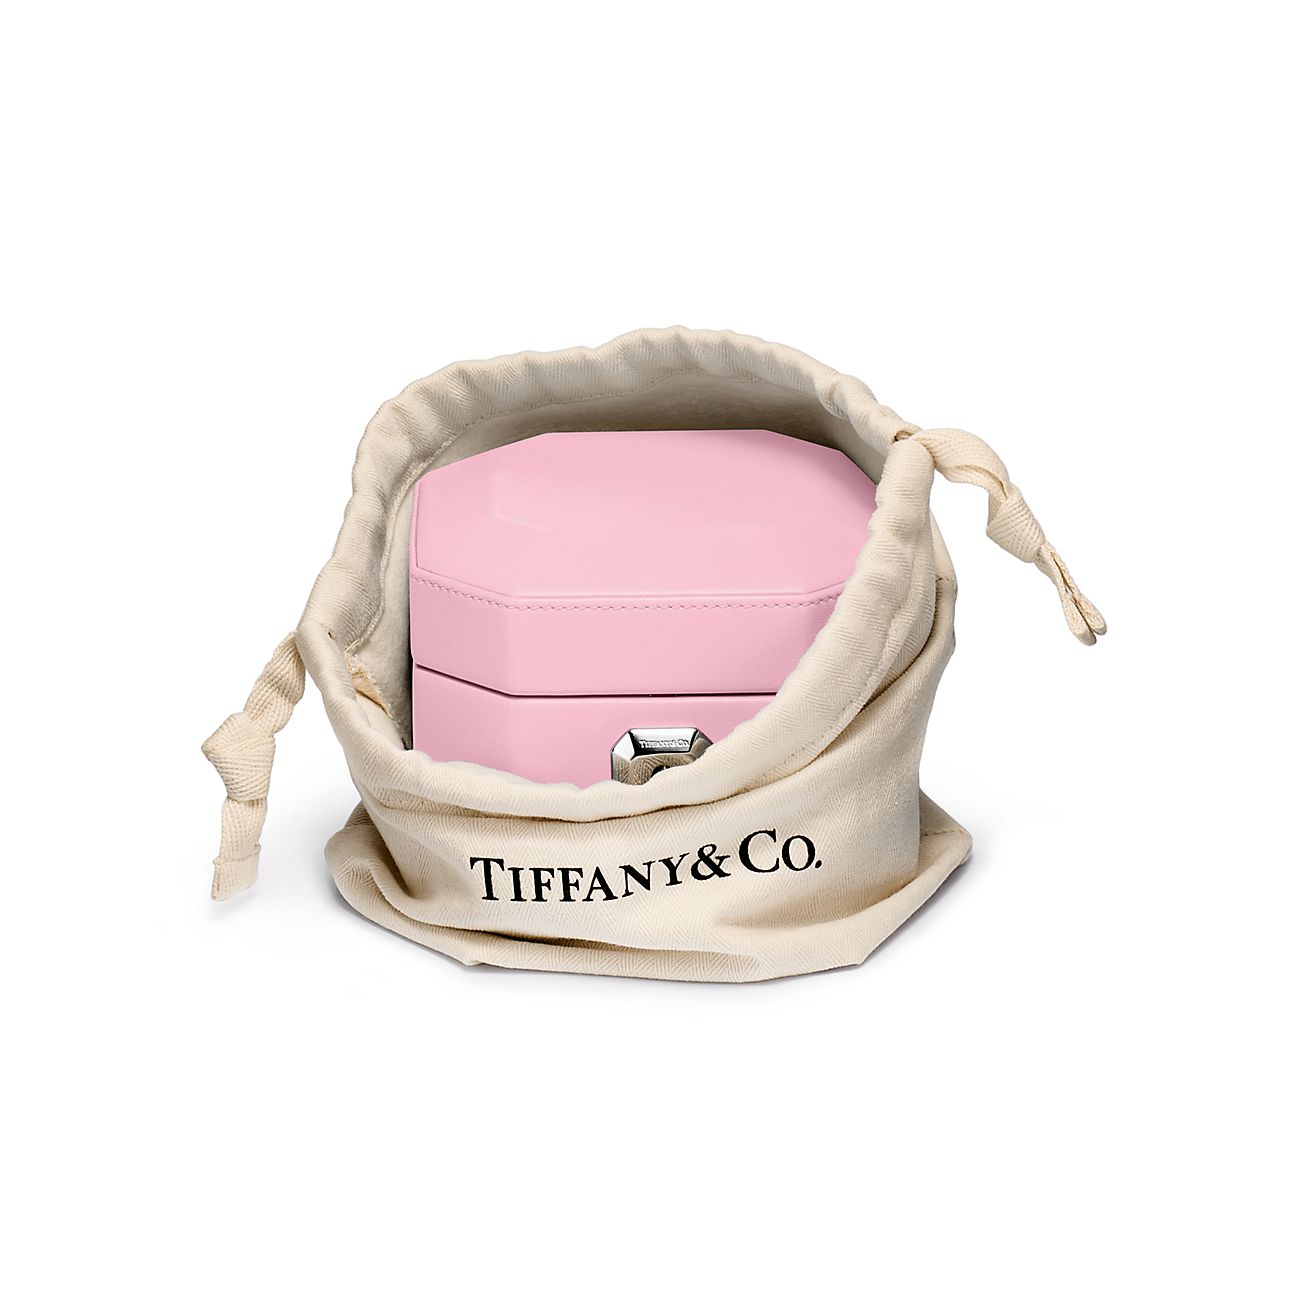 Tiffany Facets Small Jewelry Box in Morganite-Colored Leather, Size: 3.2 in.